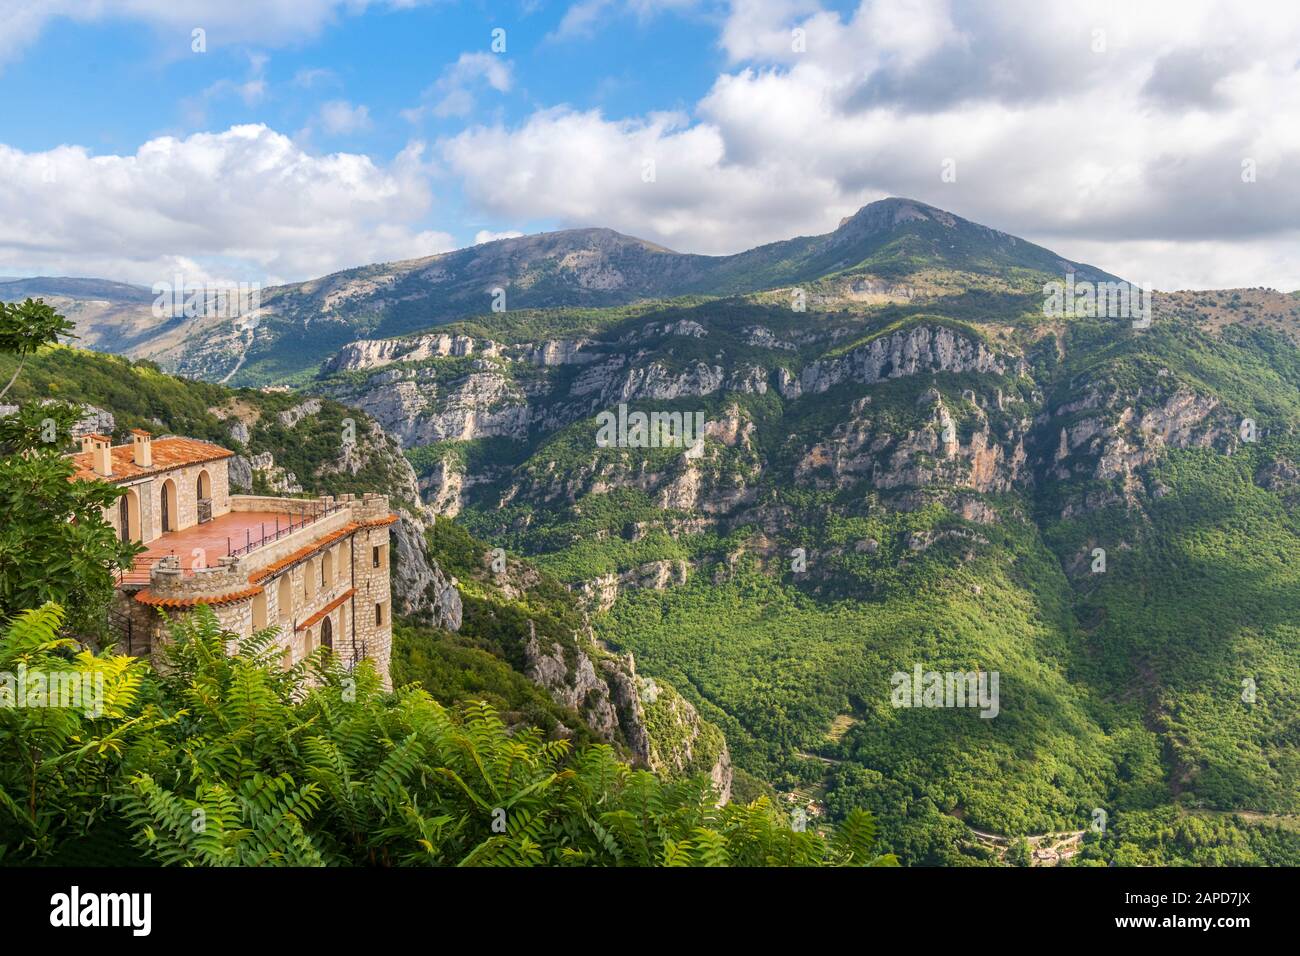 A medieval mountaintop castle overlooks a valley in the Alpes-Maritimes area of Southern France, near the village of Gourdon Stock Photo